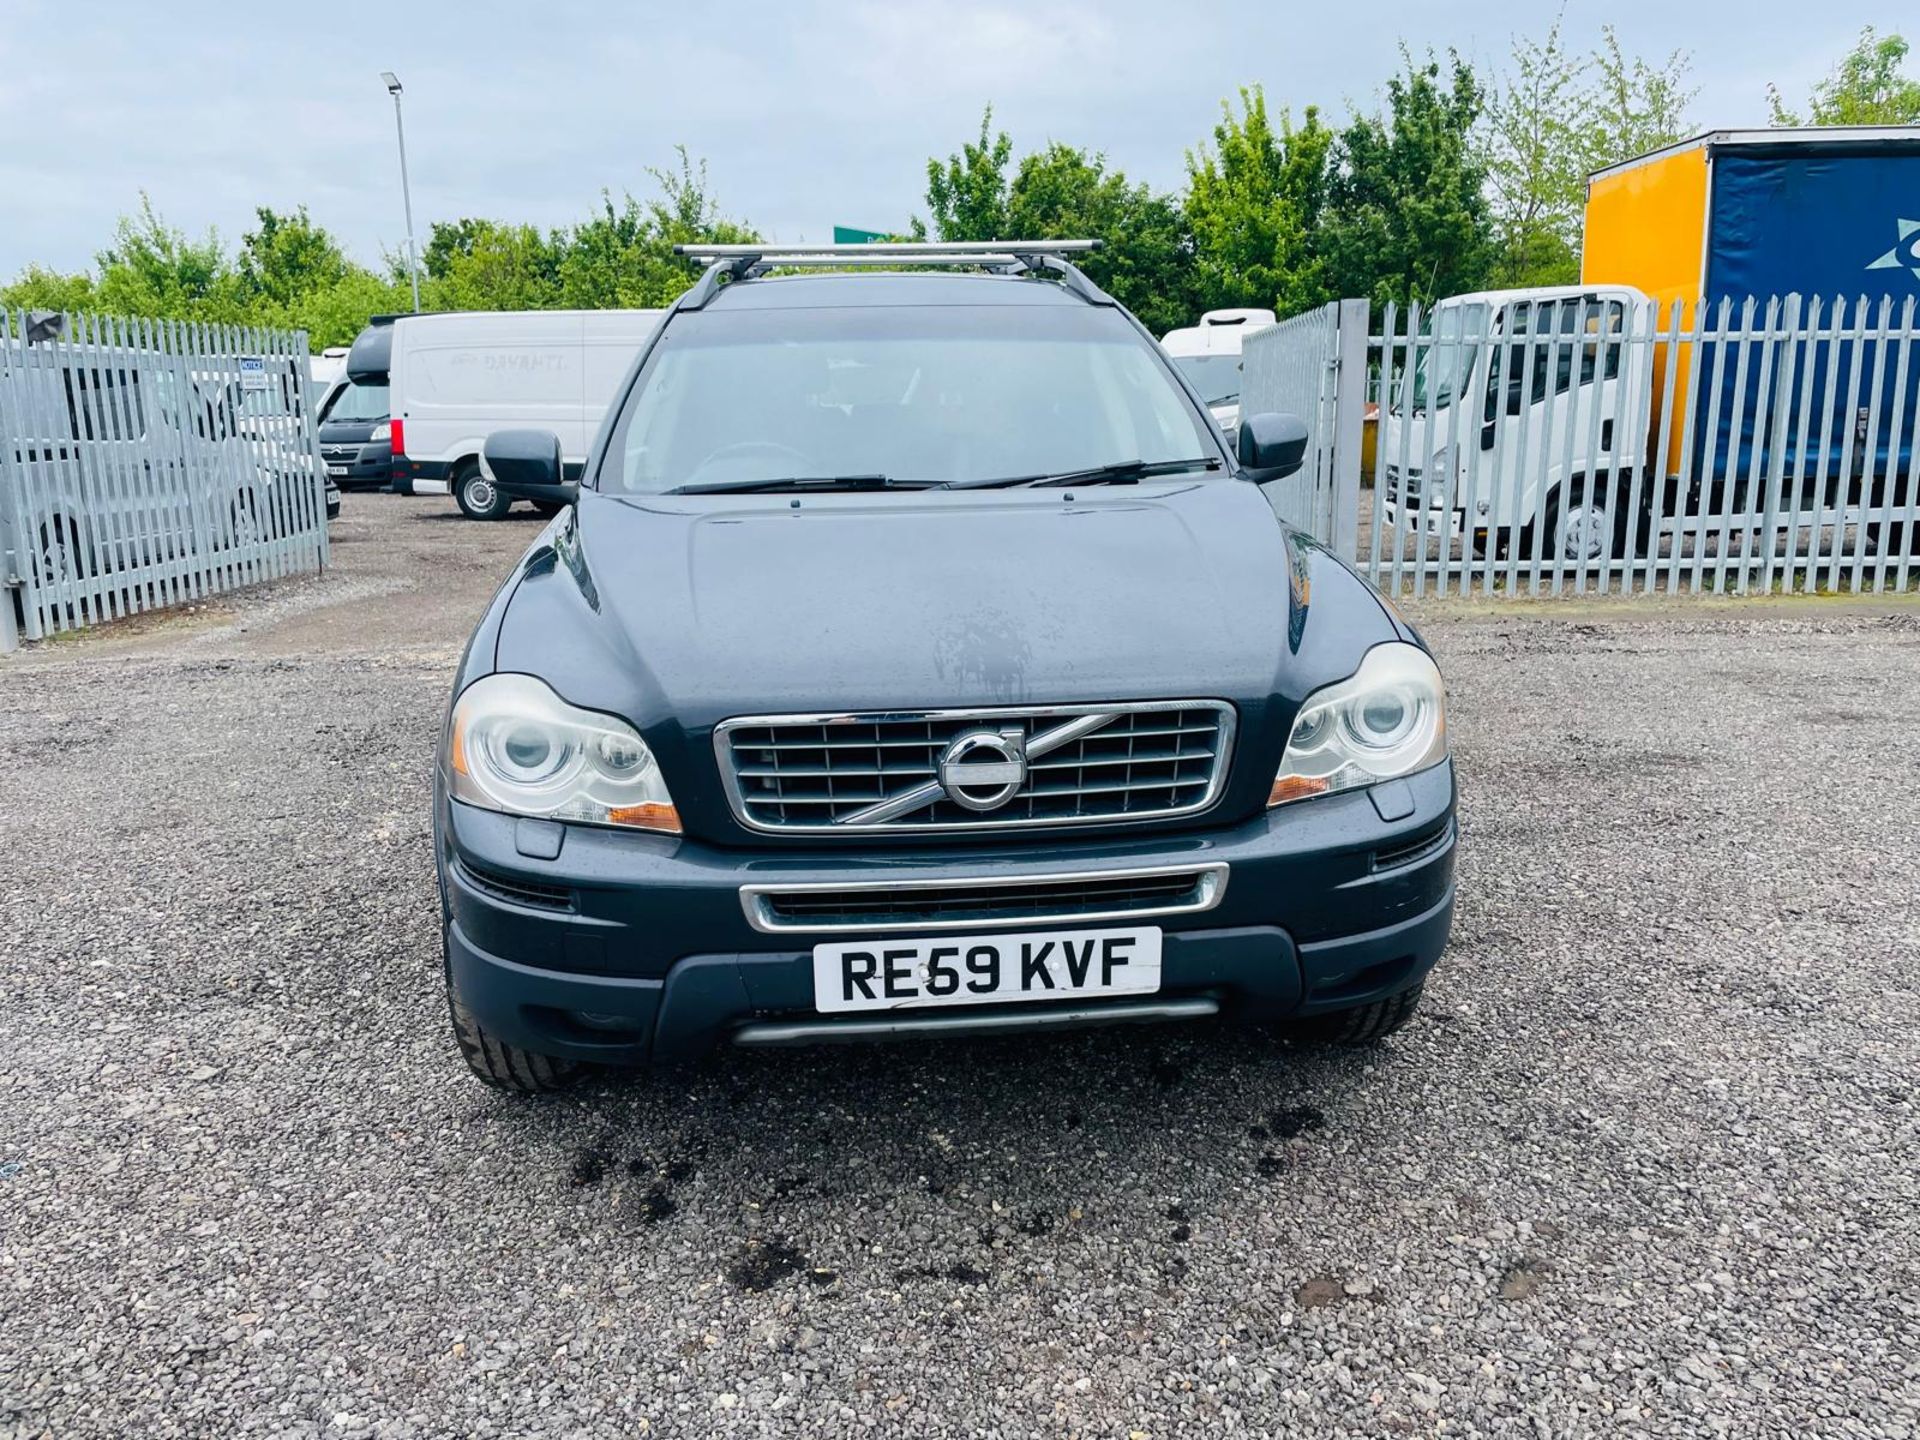 Volvo XC90 D5 185 Active 2.4 2009 '59 Reg' -7 Seats-Air Conditioning-Power Mirrors-Automatic-No Vat - Image 2 of 34